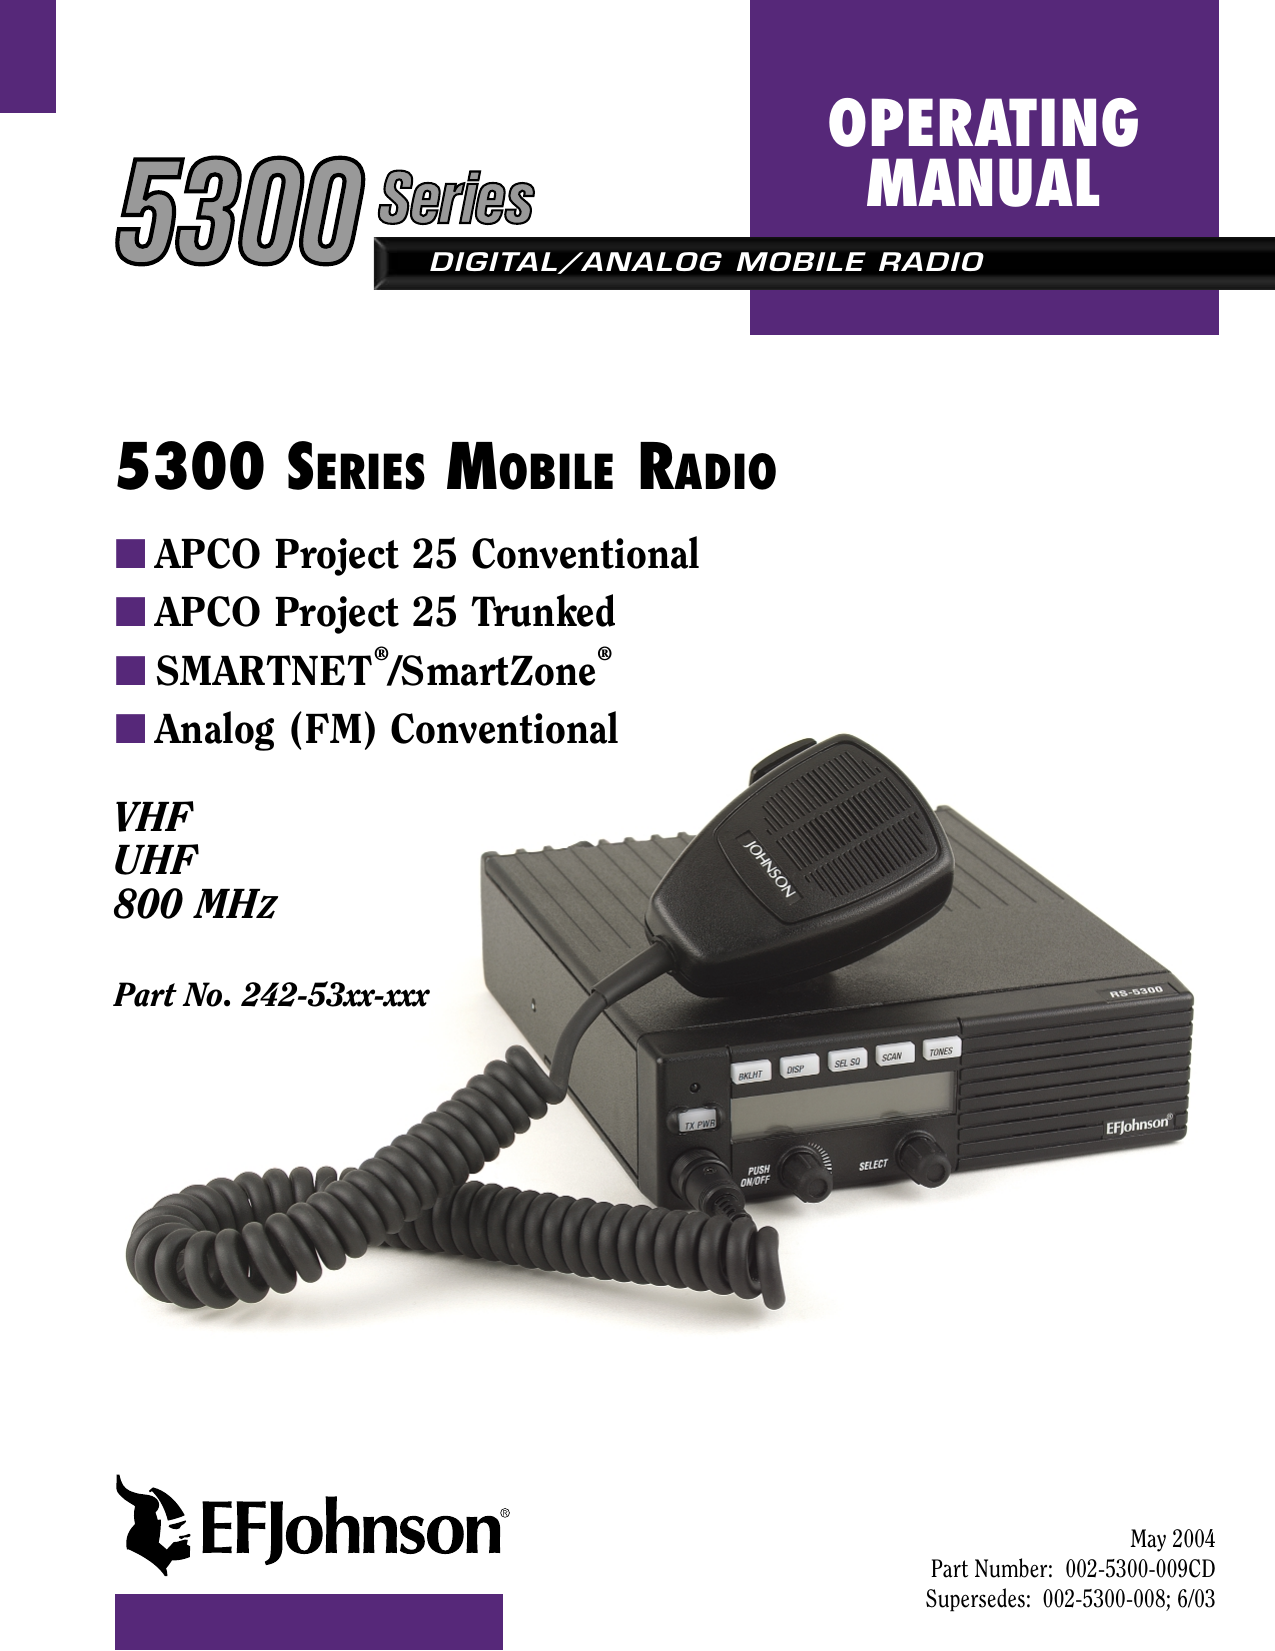 DIGITAL/ANALOG MOBILE RADIOOPERATINGMANUAL5300 SERIES MOBILE RADIO■APCO Project 25 Conventional■APCO Project 25 Trunked■SMARTNET®/SmartZone®■Analog (FM) ConventionalVHFUHF800 MHZPart No. 242-53xx-xxxMay 2004Part Number:  002-5300-009CDSupersedes: 002-5300-008; 6/03